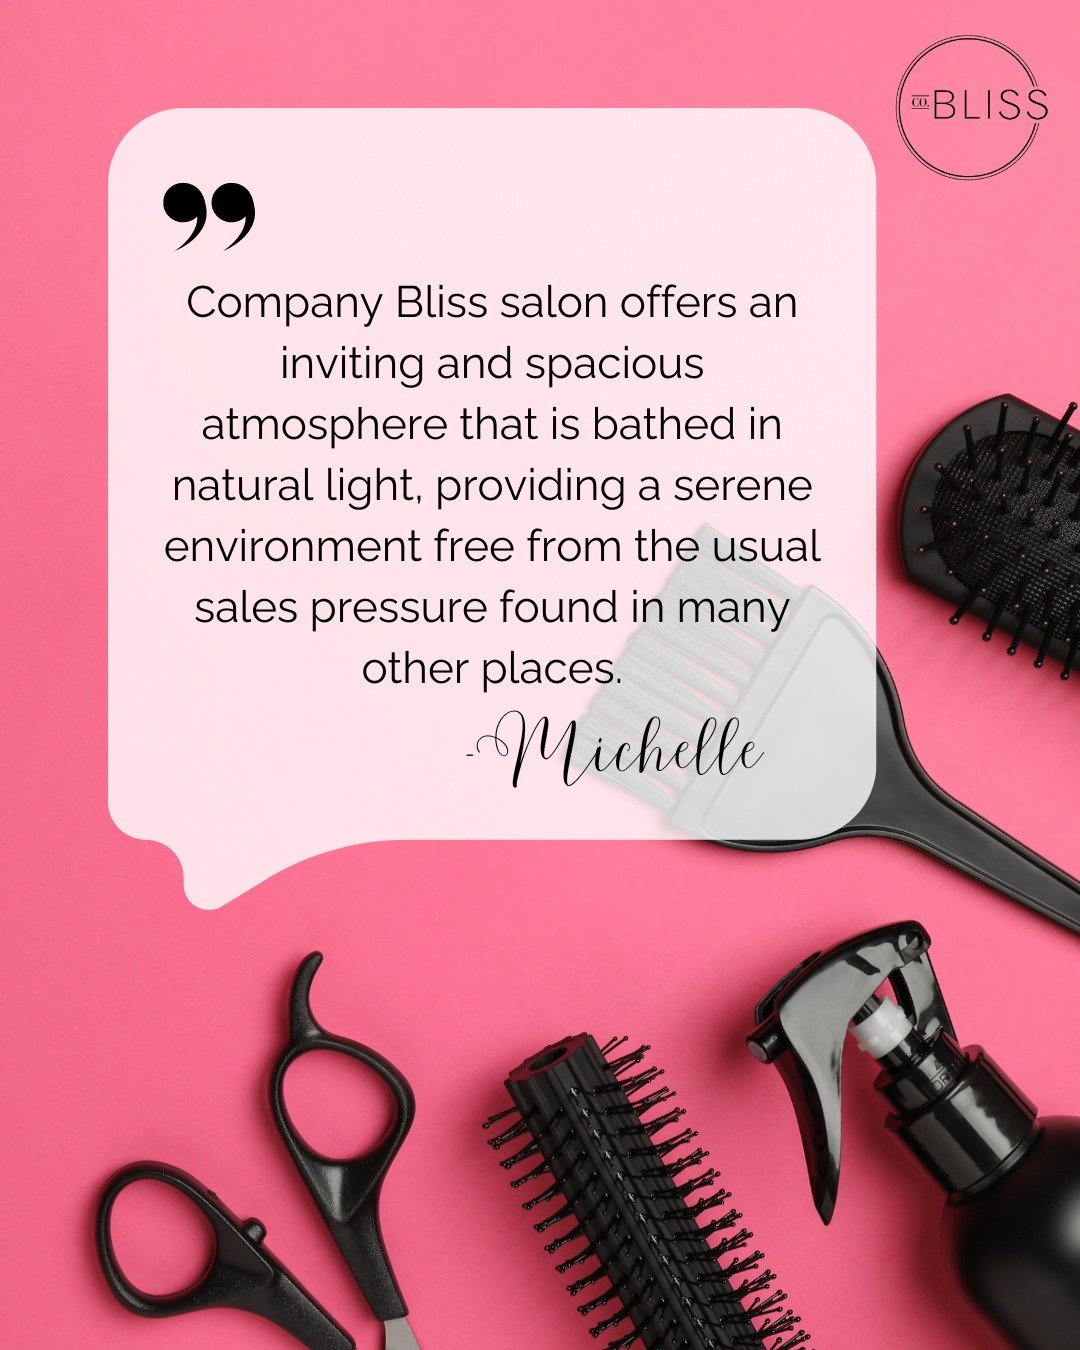 🌼 Thank you for your excellent review Michelle! 🌼

&quot;Company Bliss Salon offers an inviting and spacious atmosphere that is bathed in natural light, providing a serene environment free from the usual sales pressure found in many other places.

